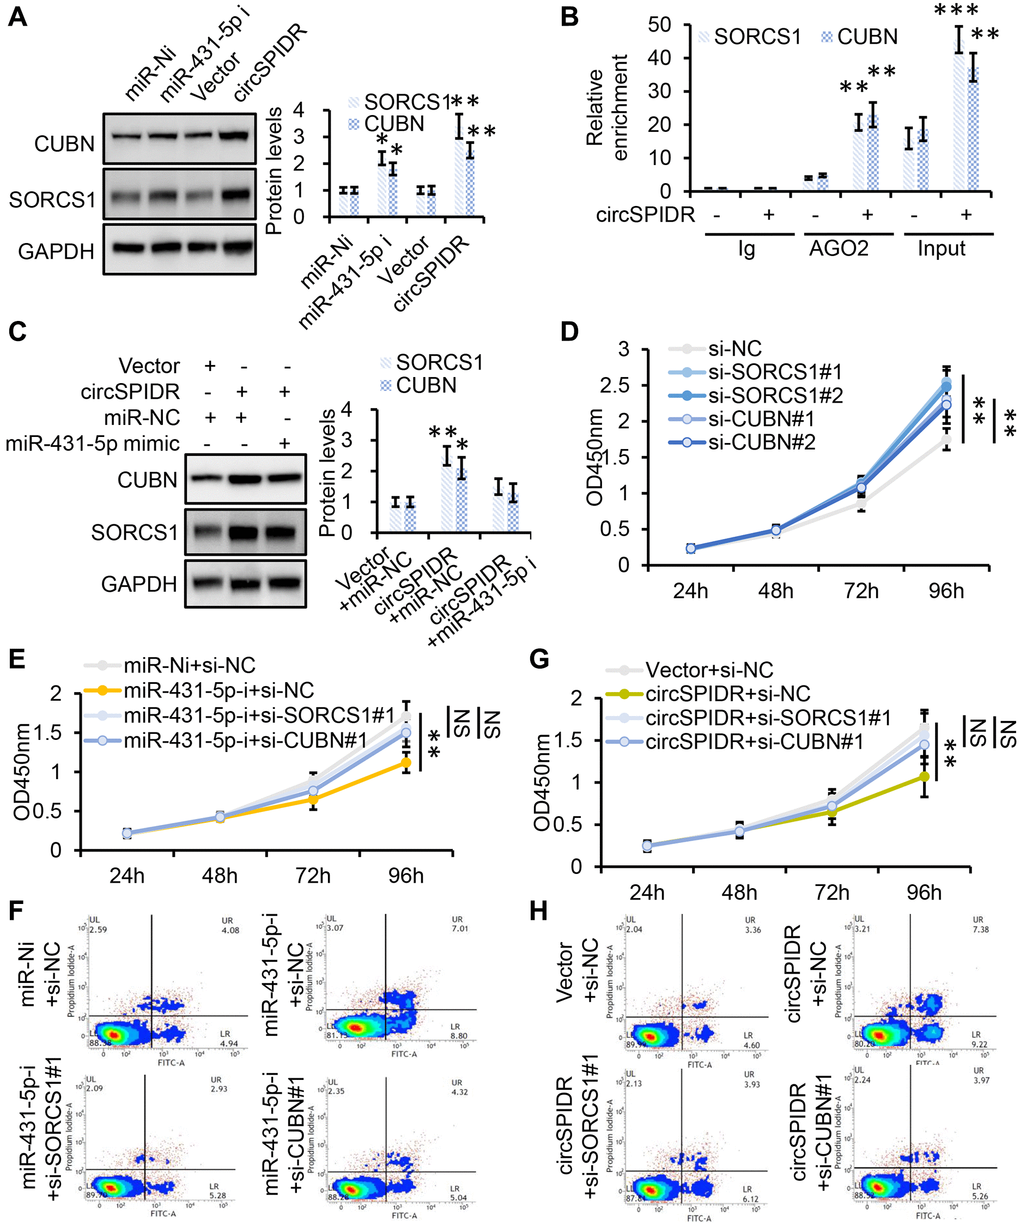 SORCS1 and CUBN are the functional targets of circSPIDR/miR-431-5p signaling. (A) Western blot analysis of SORCS1 and CUBN protein levels in CADC cells transfected with miR-431-5p inhibitors or the circSPIDR expression vector. (B) AGO2-RIP was performed using an anti-AGO2 antibody in HeLa cells transfected with circSPIDR or the vector. Then, qRT-PCR was used to assess and the enrichment of SORCS1 and CUBN. (C) Western blot analysis of SORCS1 and CUBN protein expression in CADC cells co-transfected with circSPIDR and miR-431-5p mimics. (D) CCK-8 assay in SORCS1- or CUBN-knockdown HeLa cells. (E, F) CCK-8 assay (E) and apoptosis assay (F) in HeLa cells following miR-431-5p inhibition and SORCS1 or CUBN knockdown. (G, H) CCK-8 assay (G) and apoptosis assay (H) in HeLa cells following circSPIDR overexpression and SORCS1 or CUBN knockdown. NS, not significant; *P **P ***P 